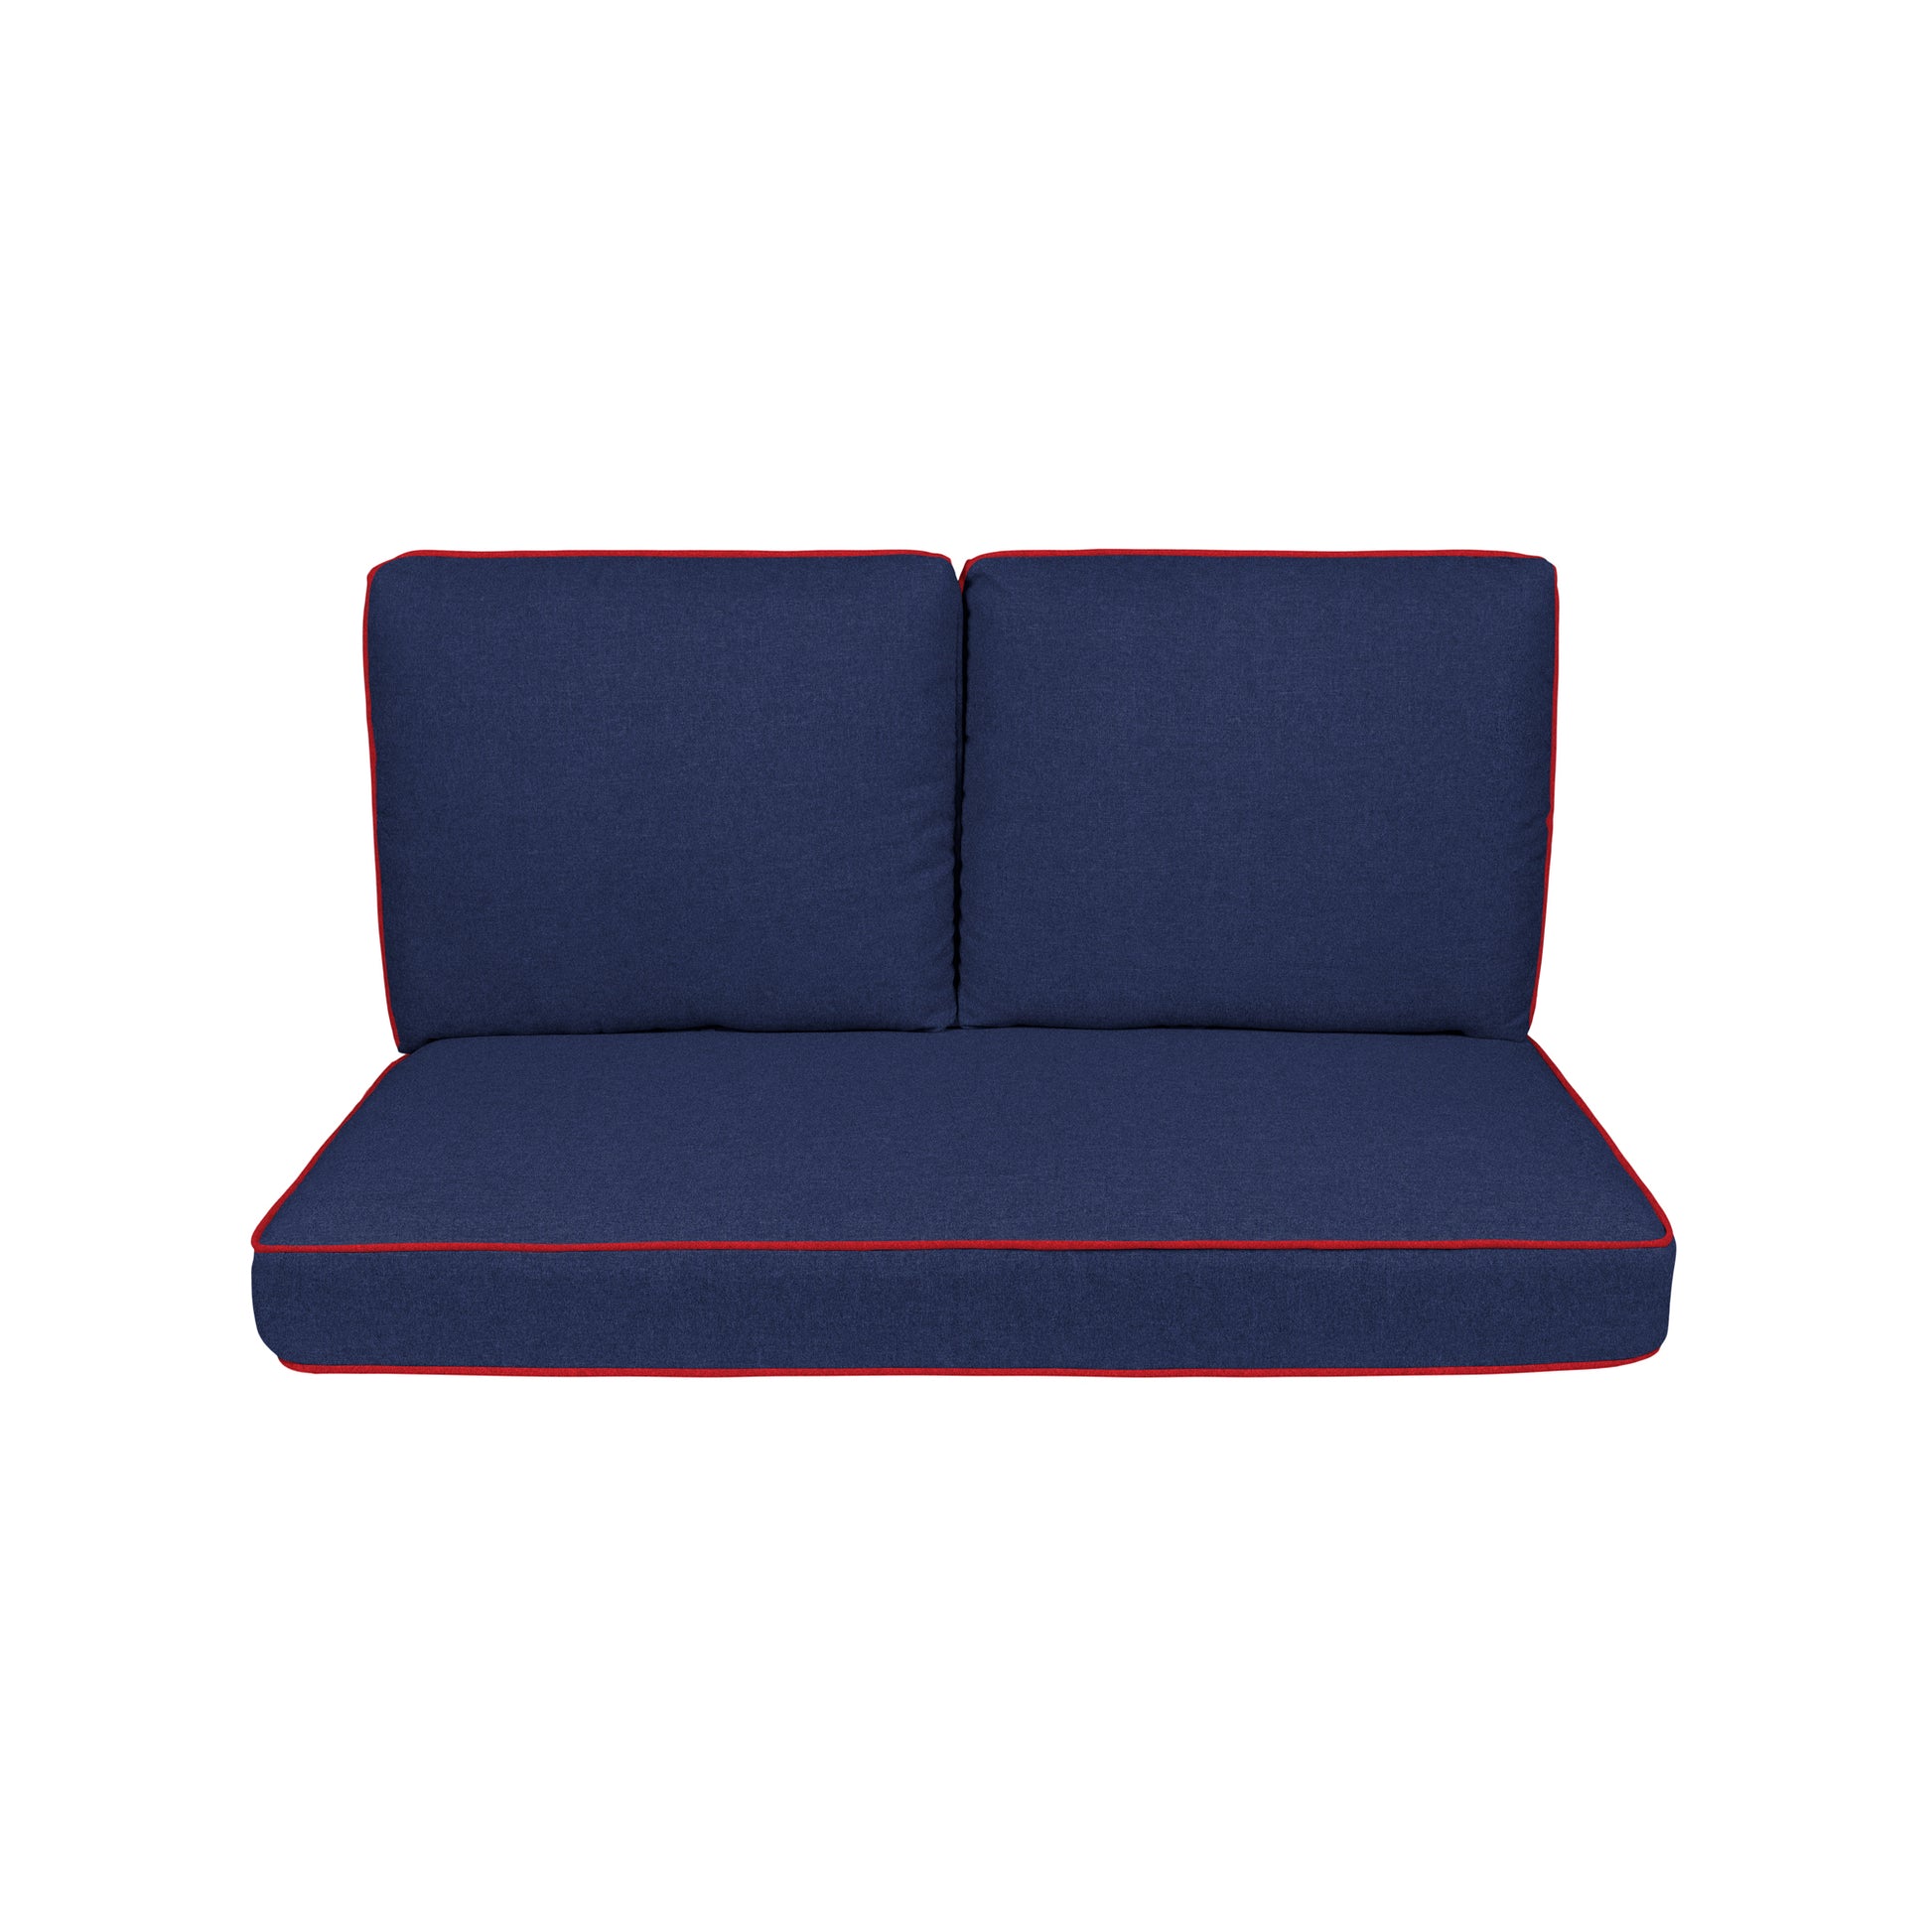 Haven Way Universal Outdoor Deep Seat Lounge Chair Cushion Set - On Sale -  Bed Bath & Beyond - 33981311